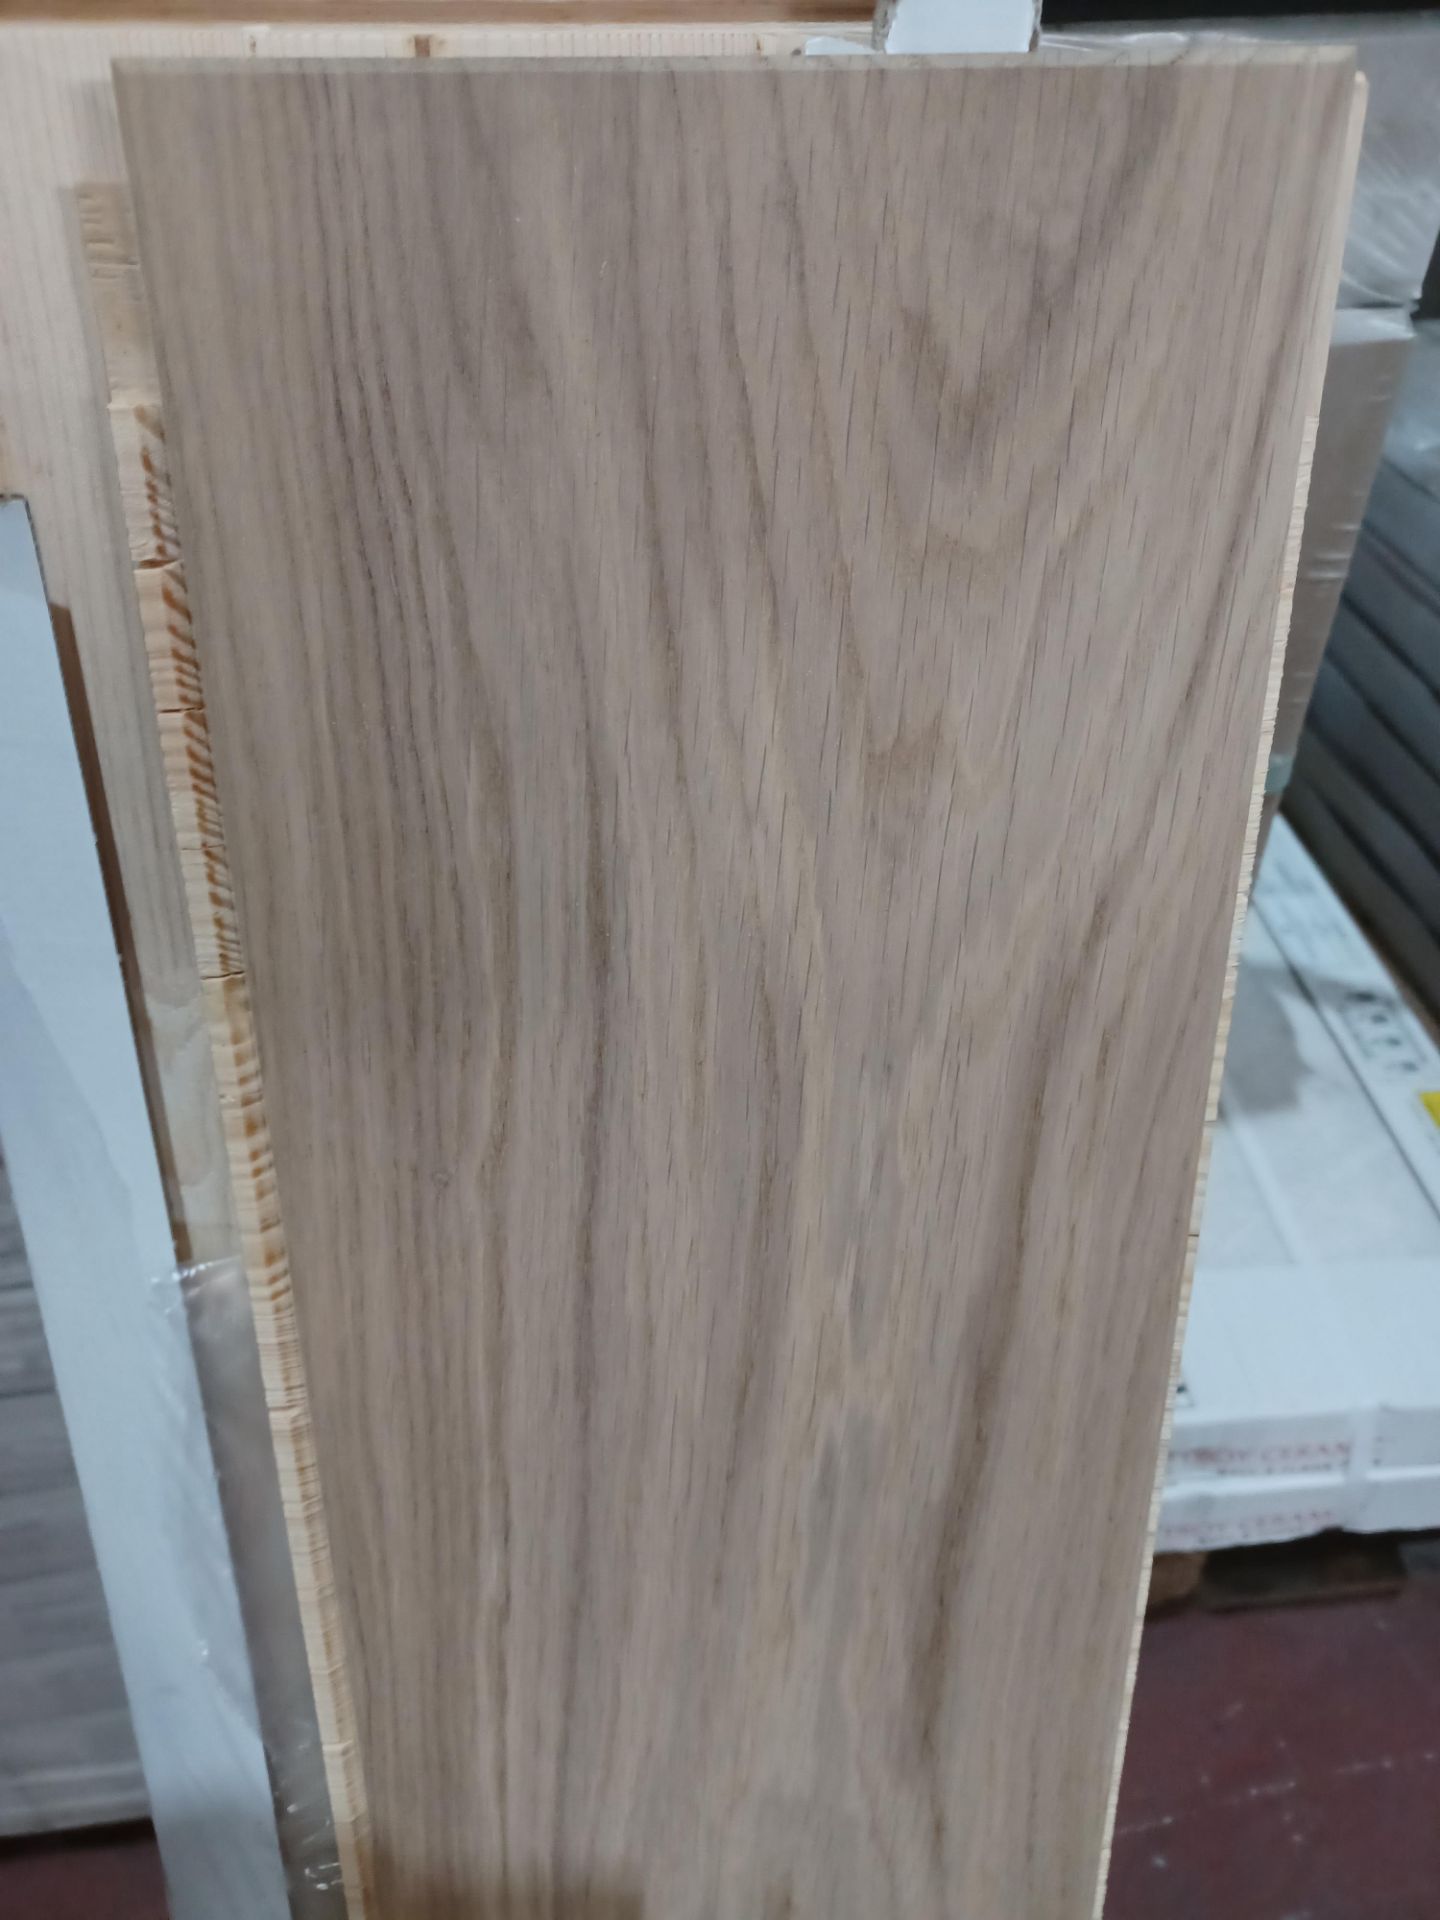 4 x PACKS OF Halland White Oak Real wood top layer flooring. Each pack contains 1.37m2, giving - Image 2 of 2